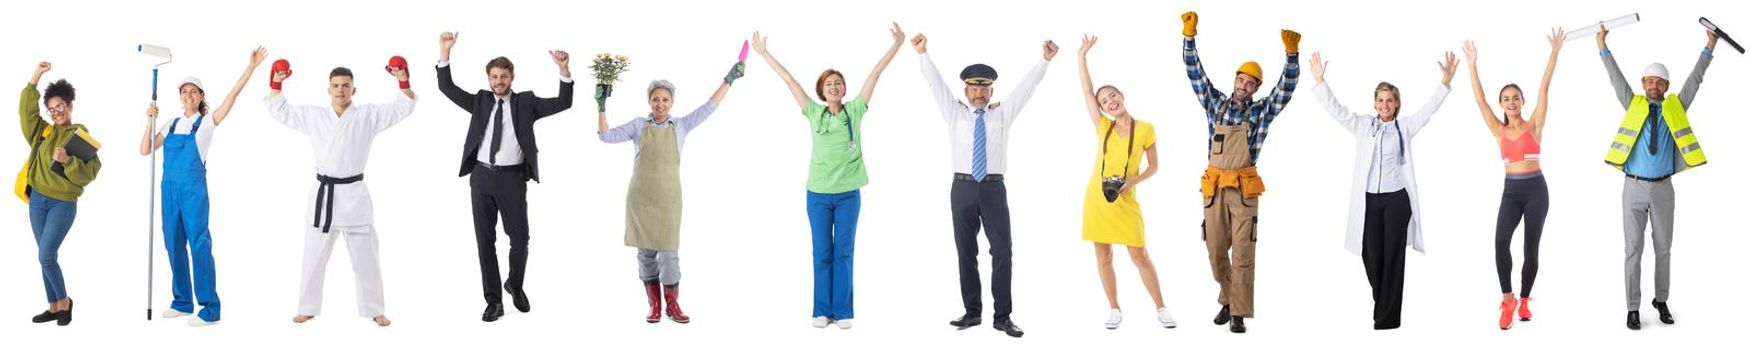 Group set of full portraits of happy people with arms raised representing diverse professions, isolated on white background